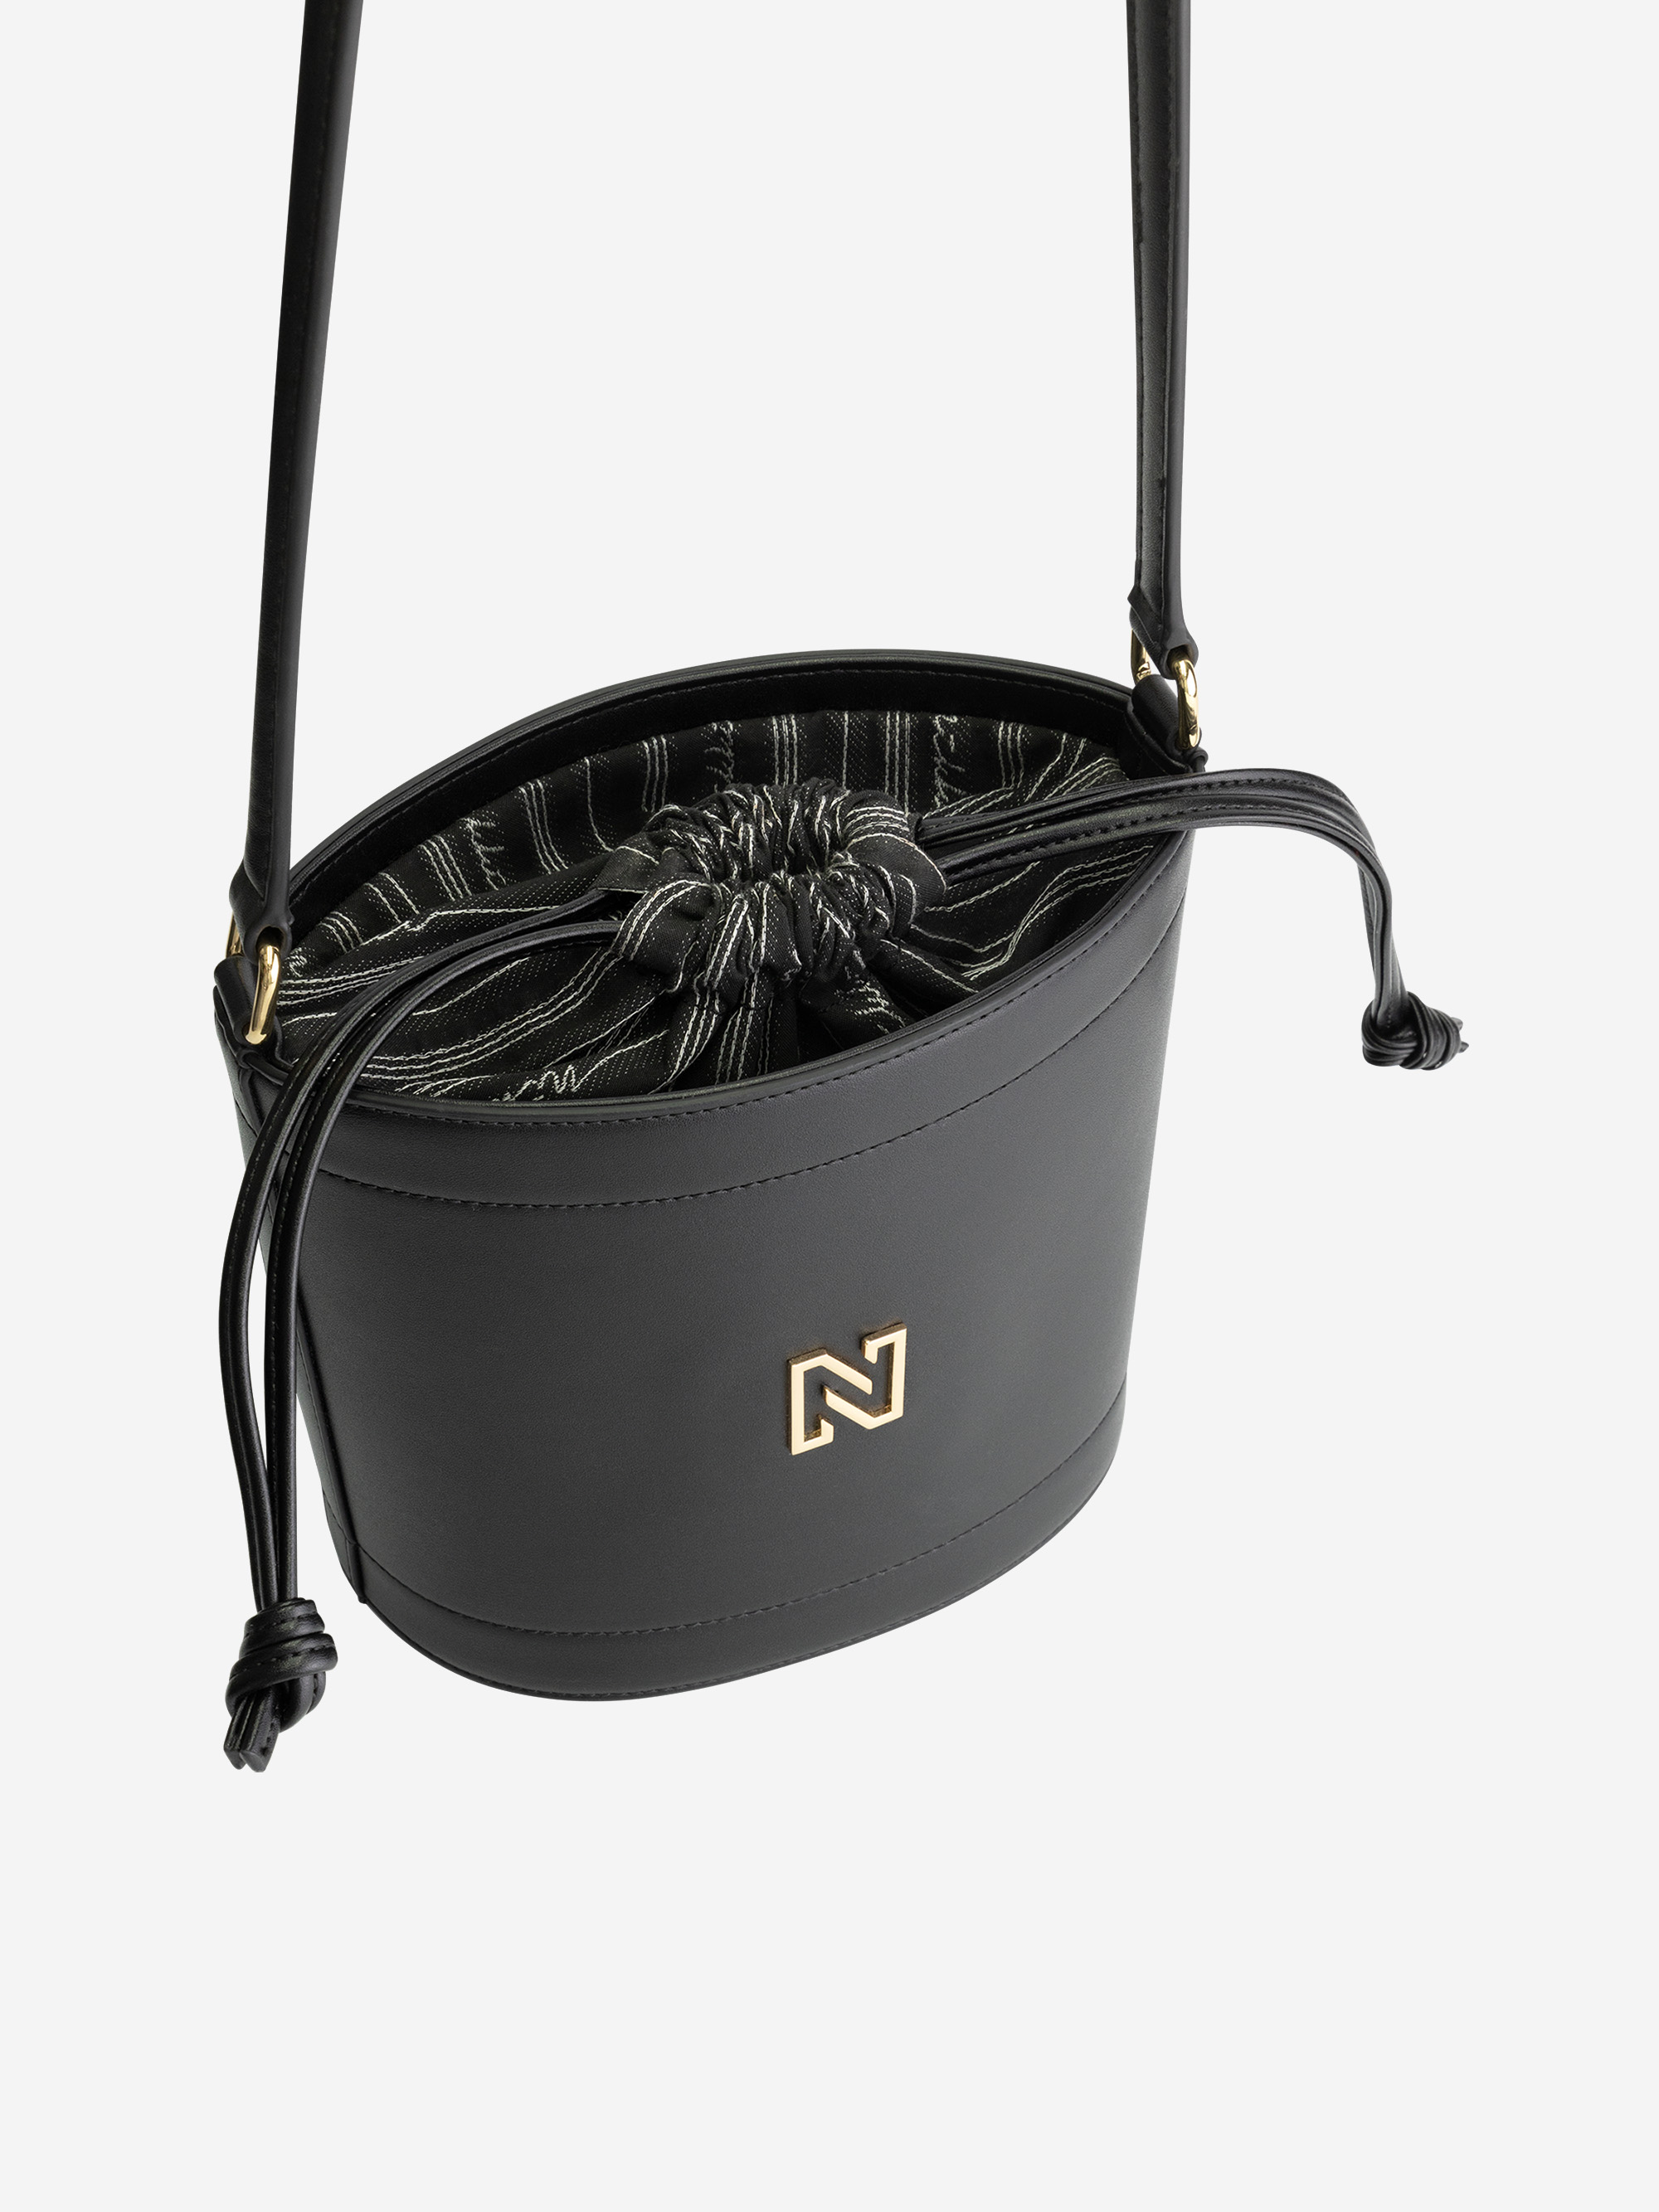 Bucket bag with chain